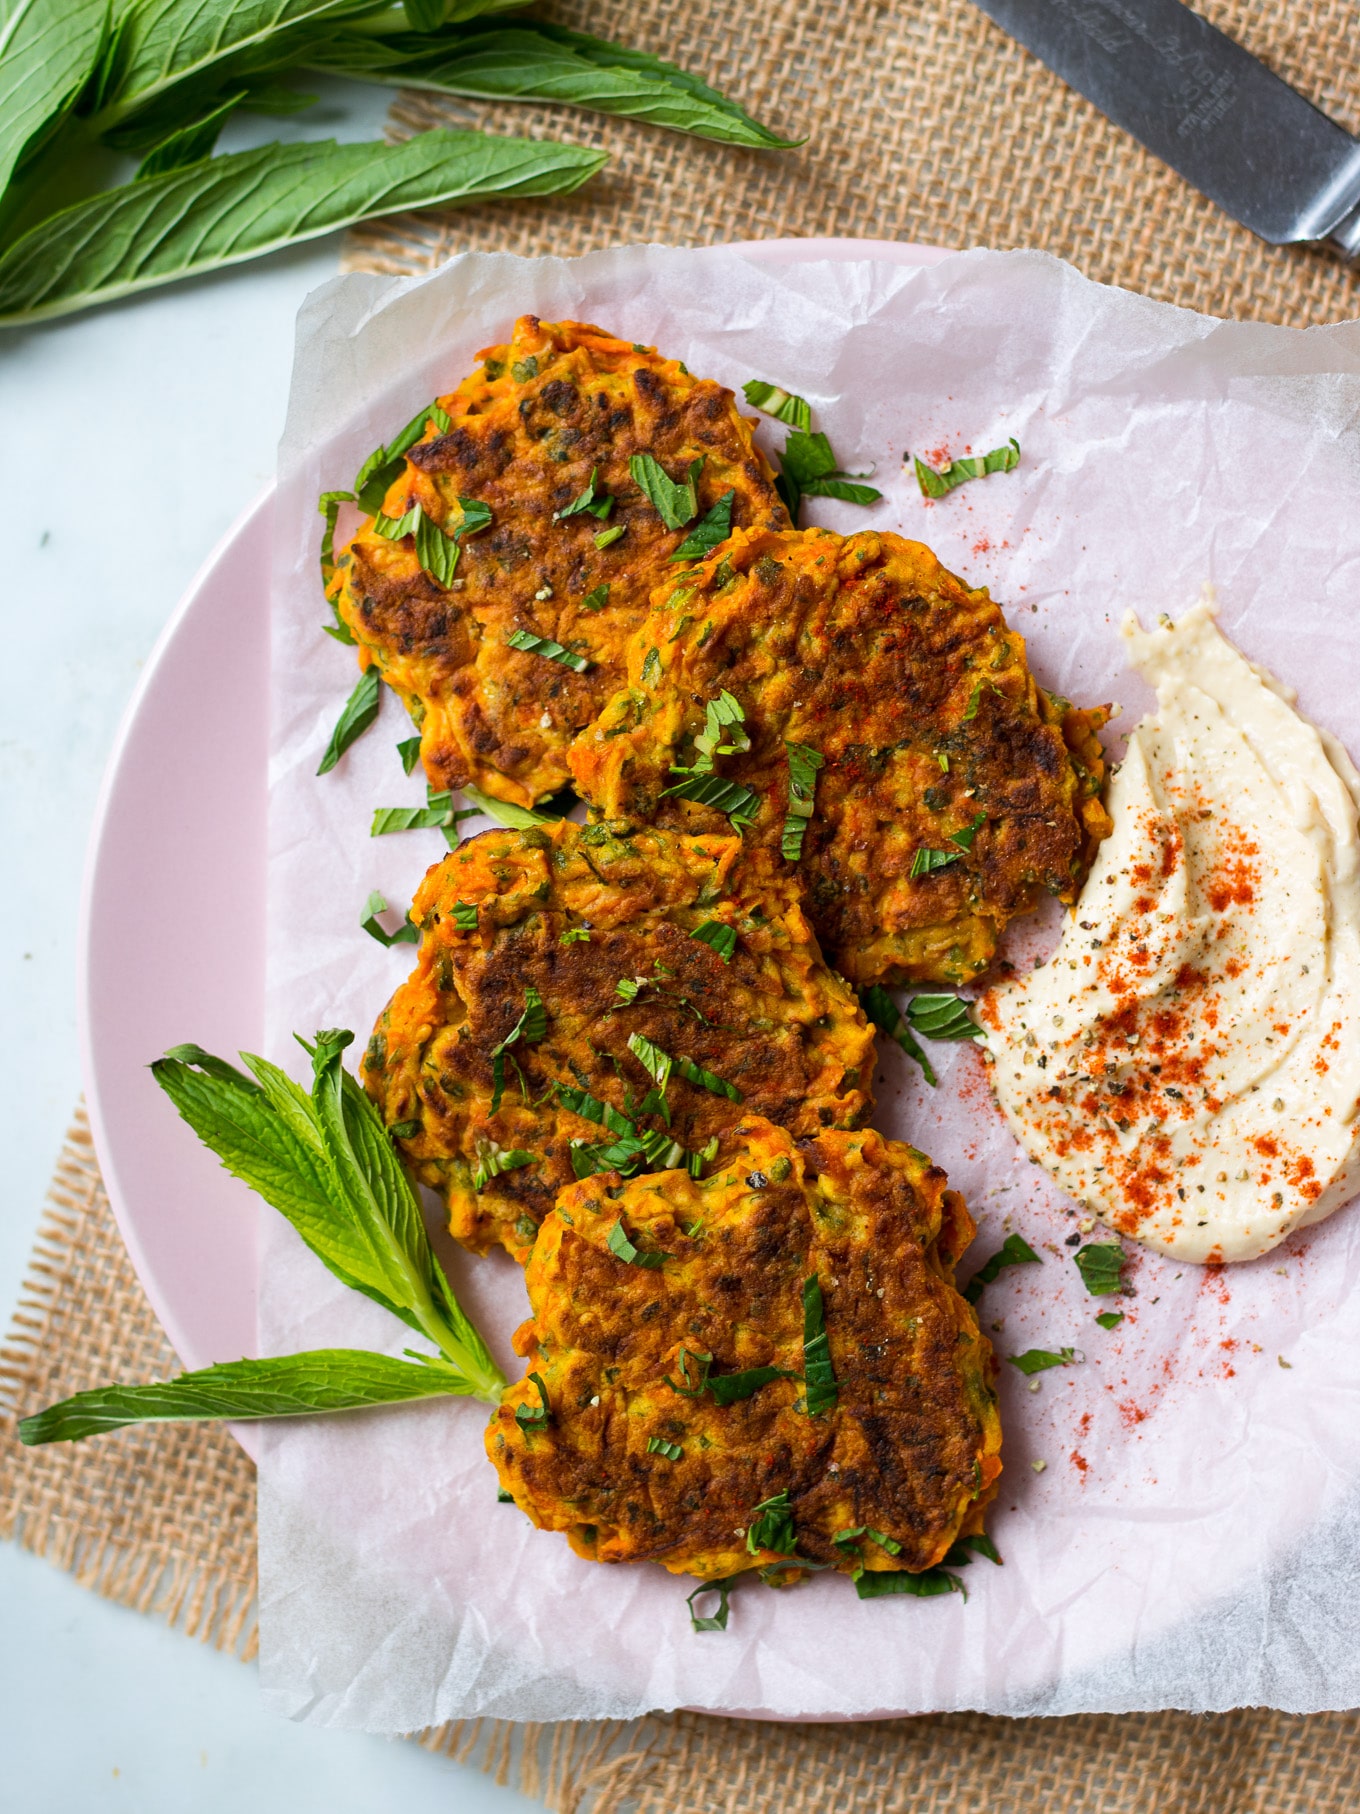 carrot fritters arranged on a pink plate